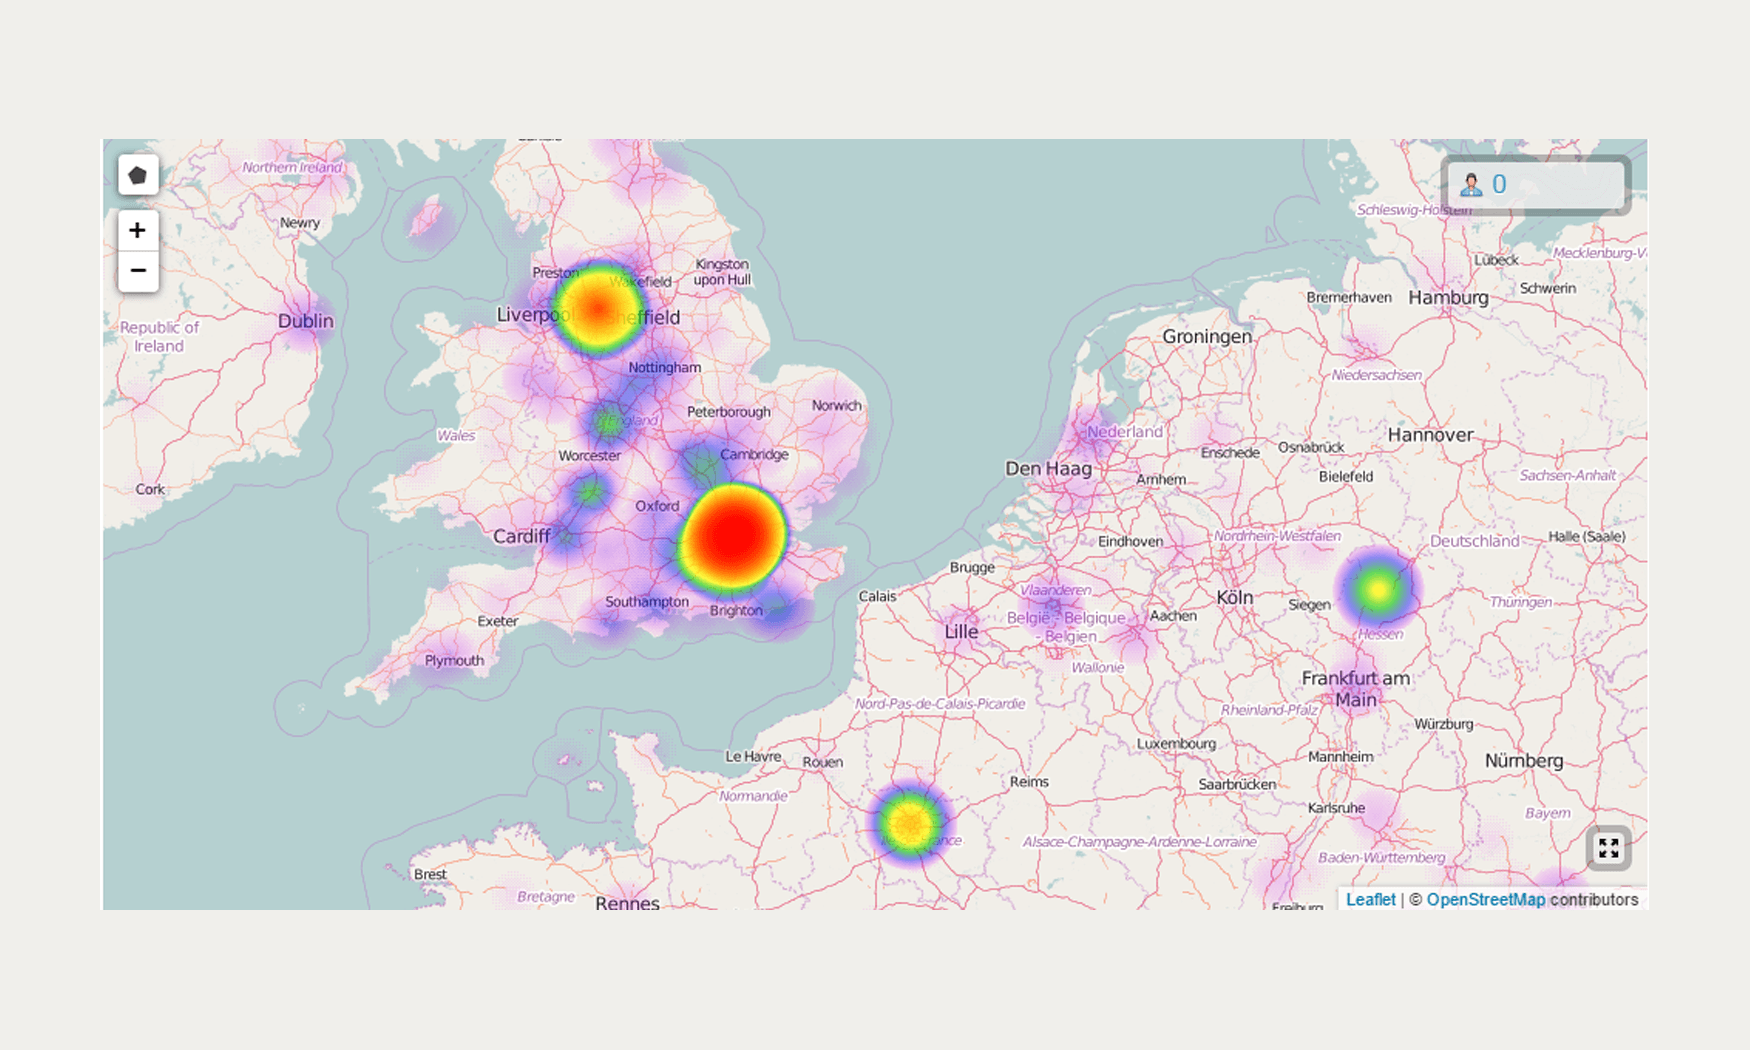 A Heatmap of the Geo location of the readers